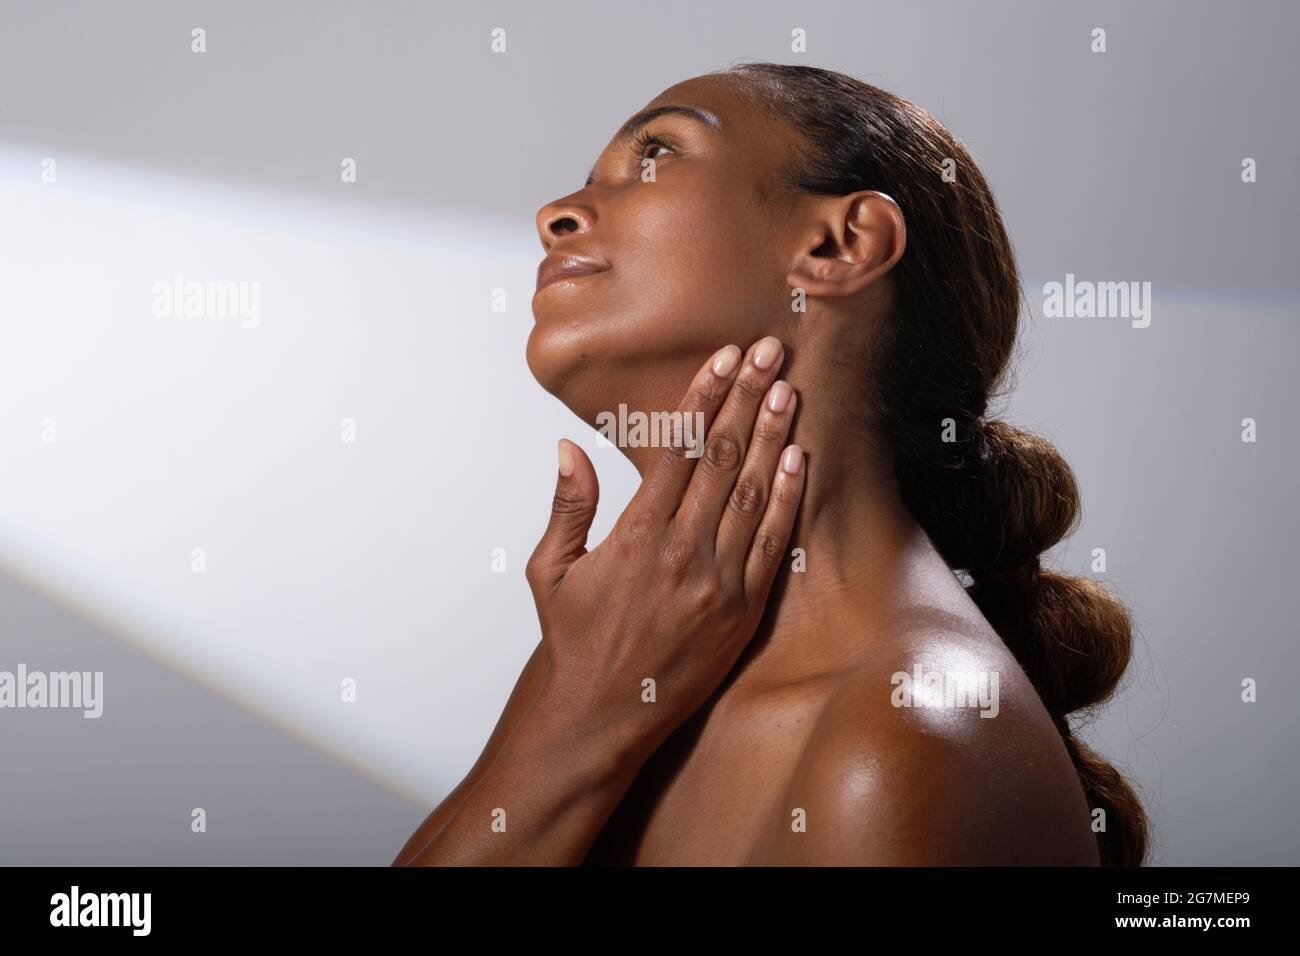 Beauty images of a woman with darker skin tone. Head and shoulder pictures of calm, happy lady. Massaging in a cream or balm into her skin. Stock Photo